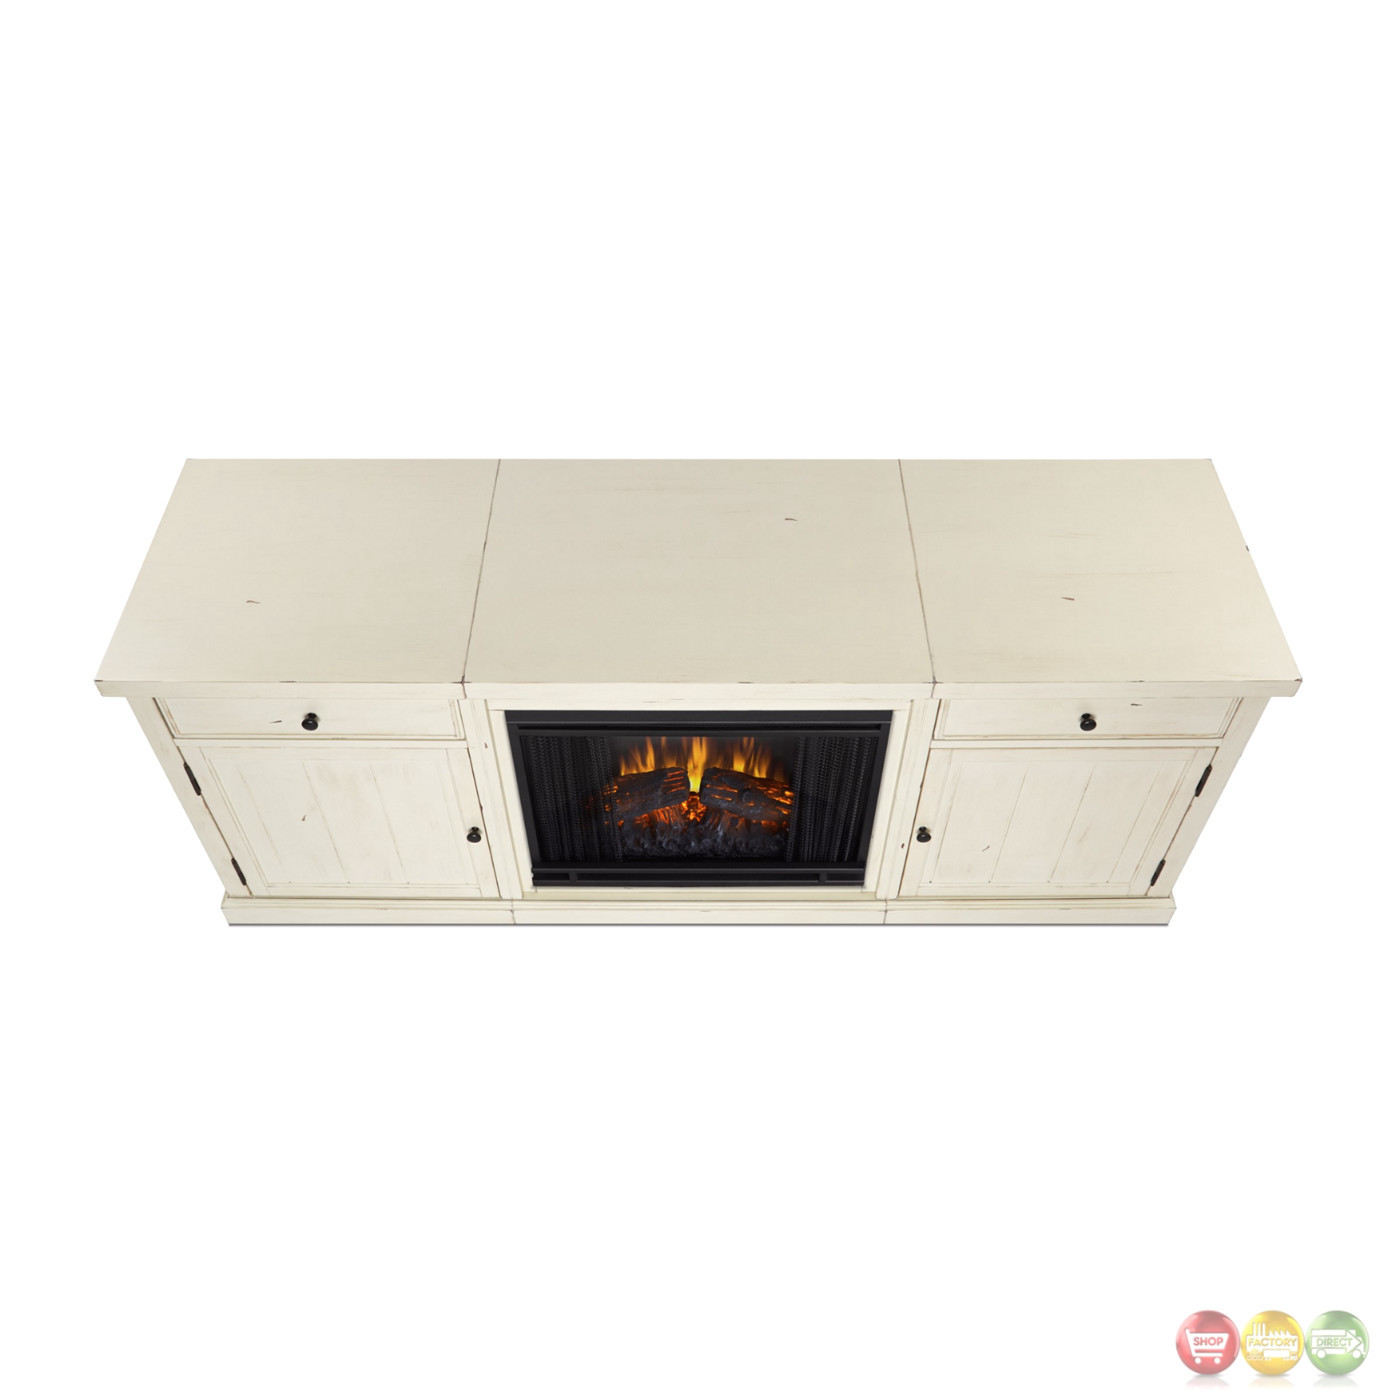 Distressed Electric Fireplace
 Cassidy Entertainment Center Electric Fireplace In